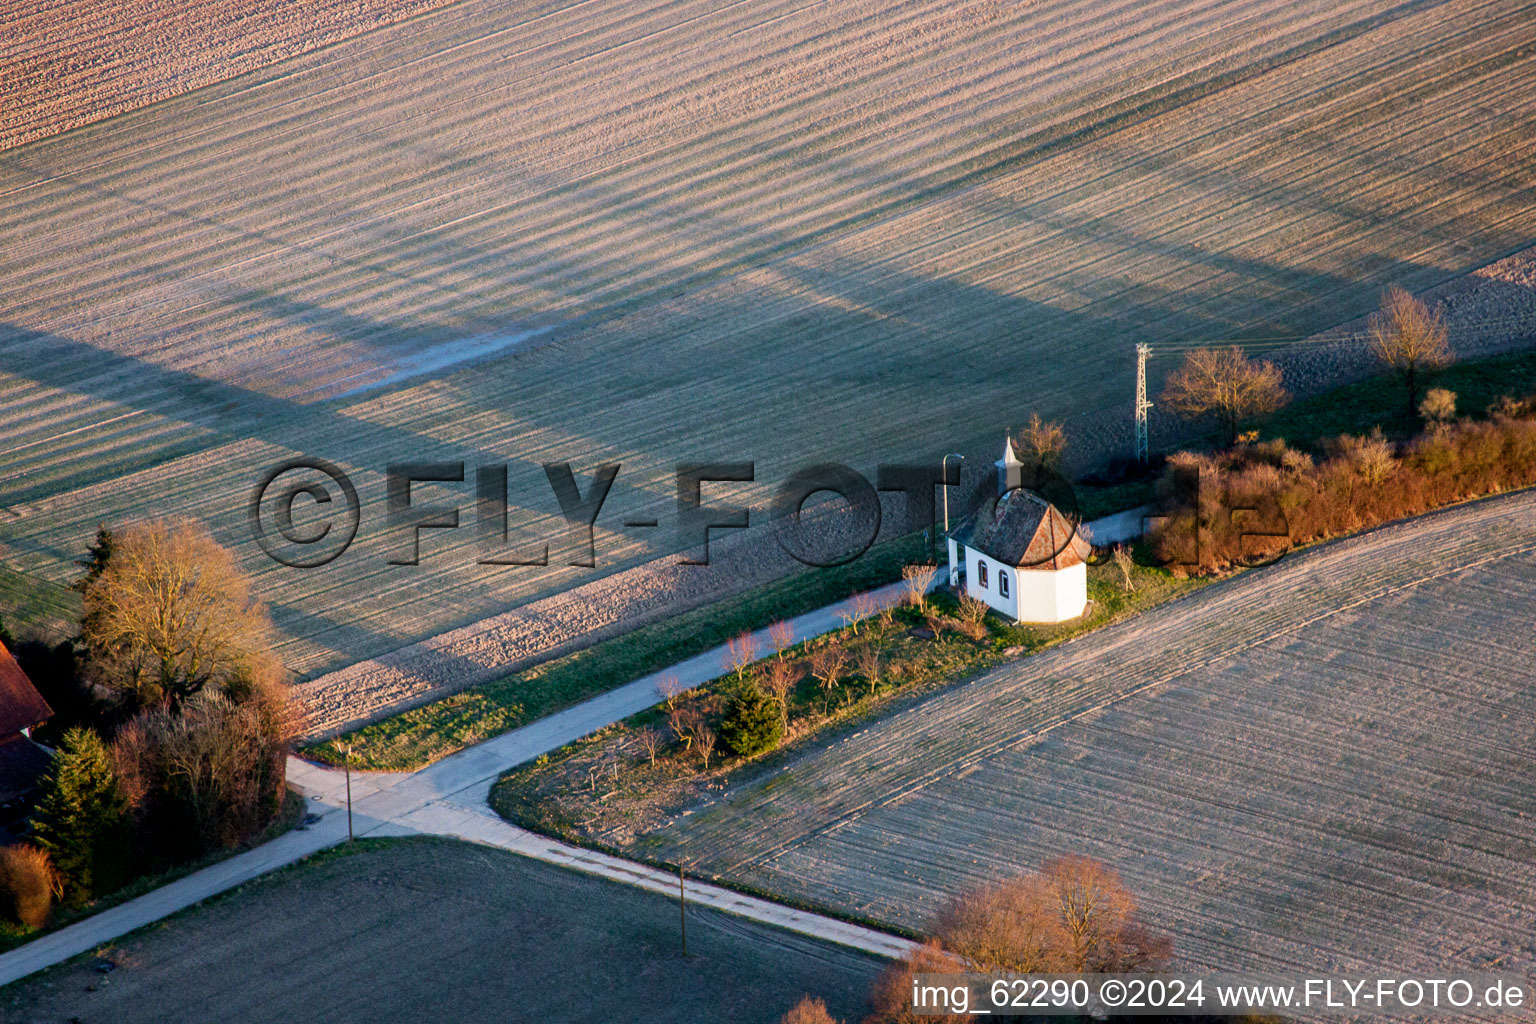 Aerial view of Churches building of a chapel in Ruelzheim in the state Rhineland-Palatinate, Germany